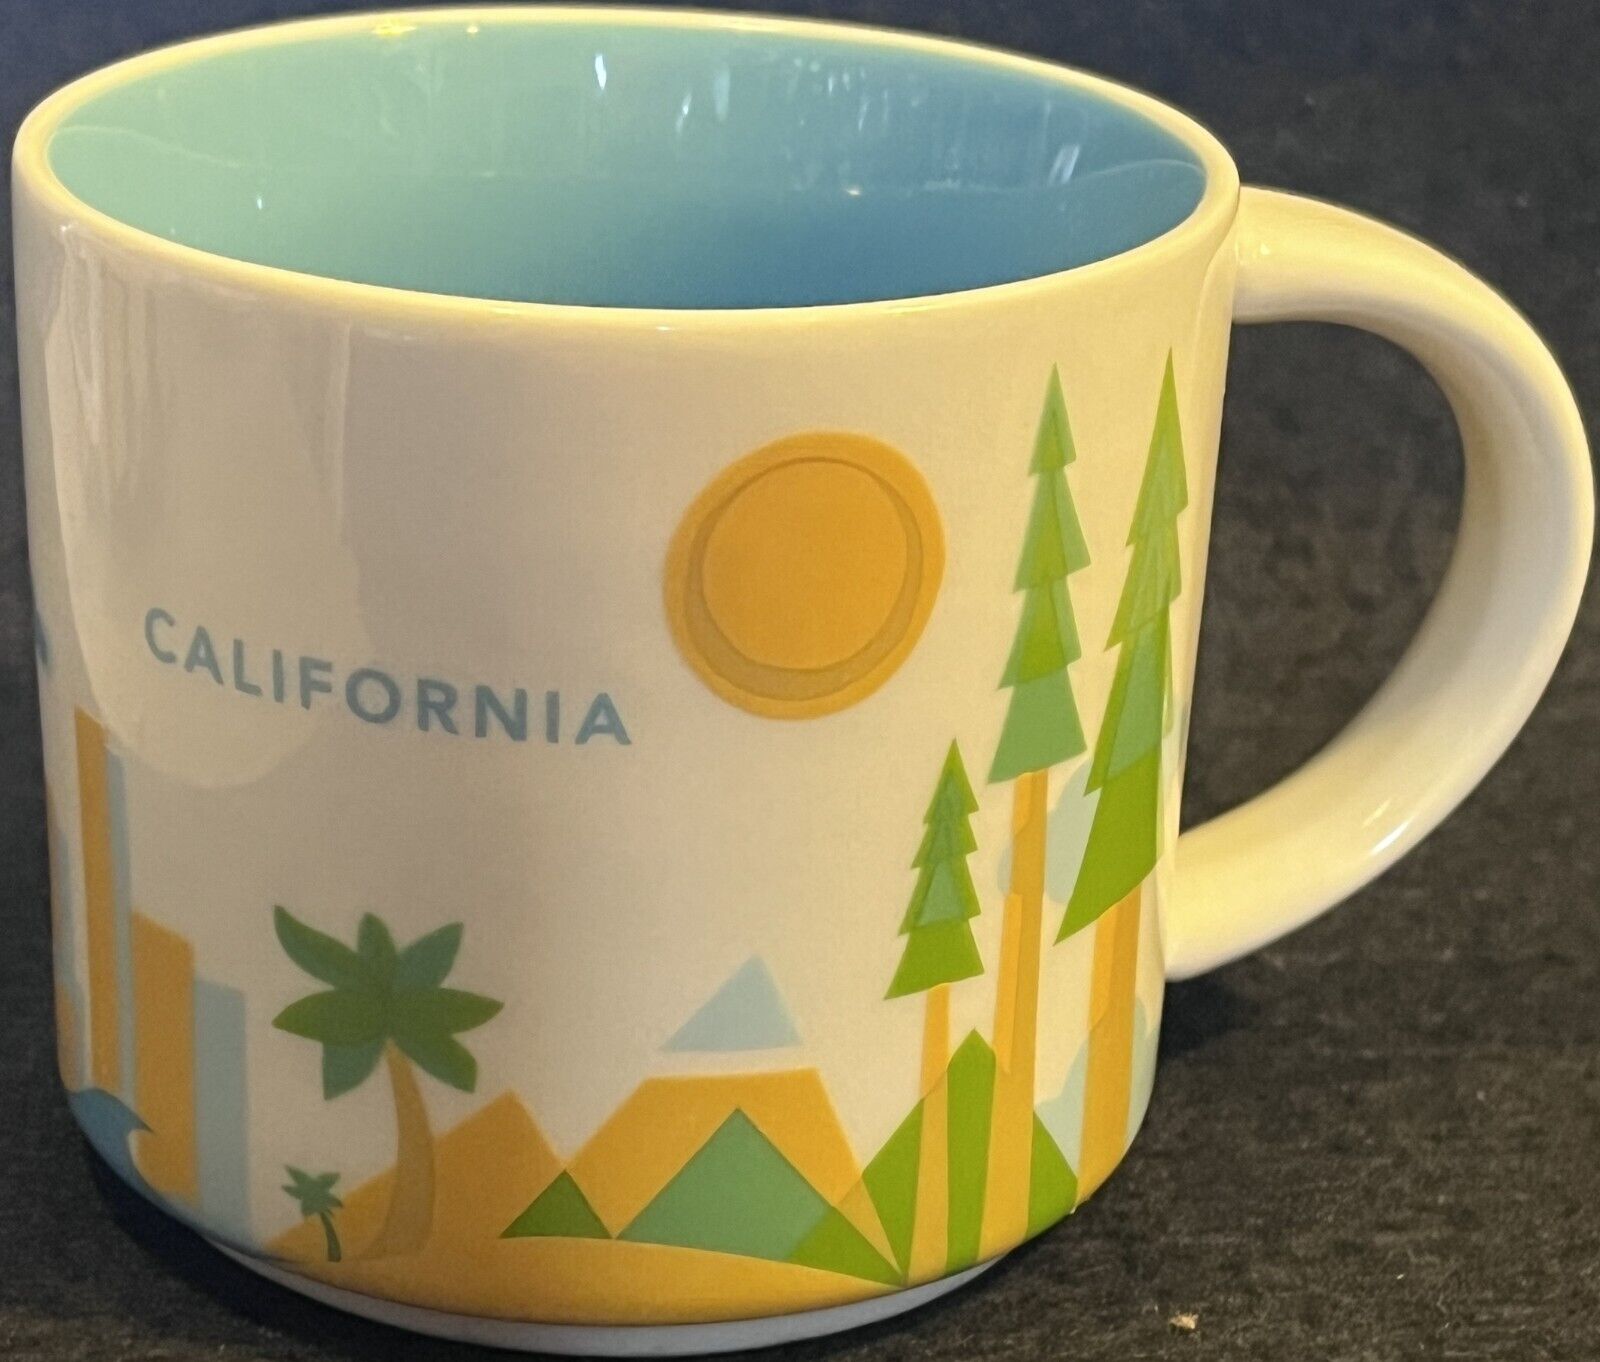 Starbucks YOU ARE HERE Collection 2015 CALIFORNIA Coffee Cup Mug 14 Oz. New